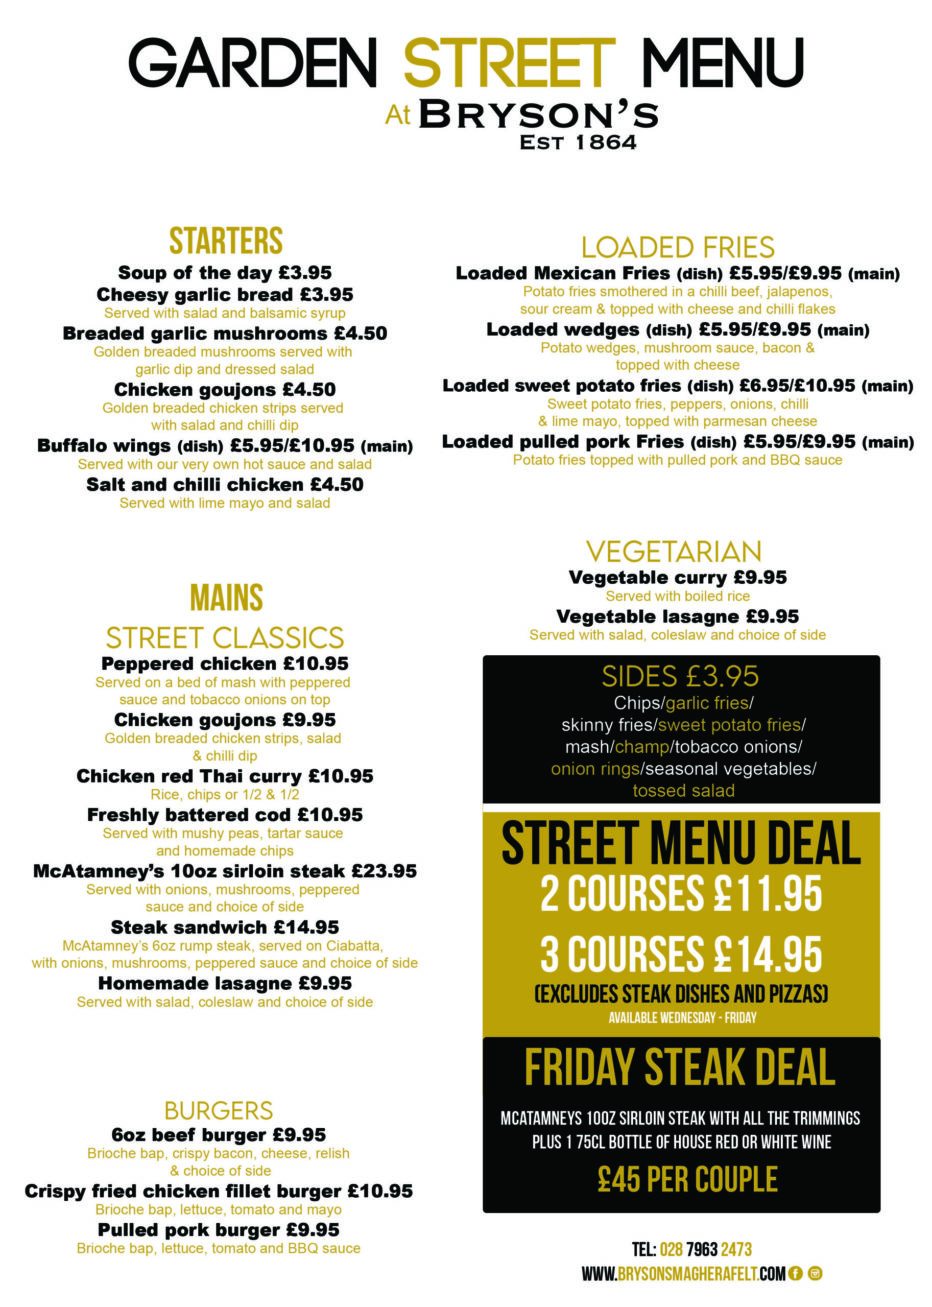 Check out our NEW lunch/evening menus